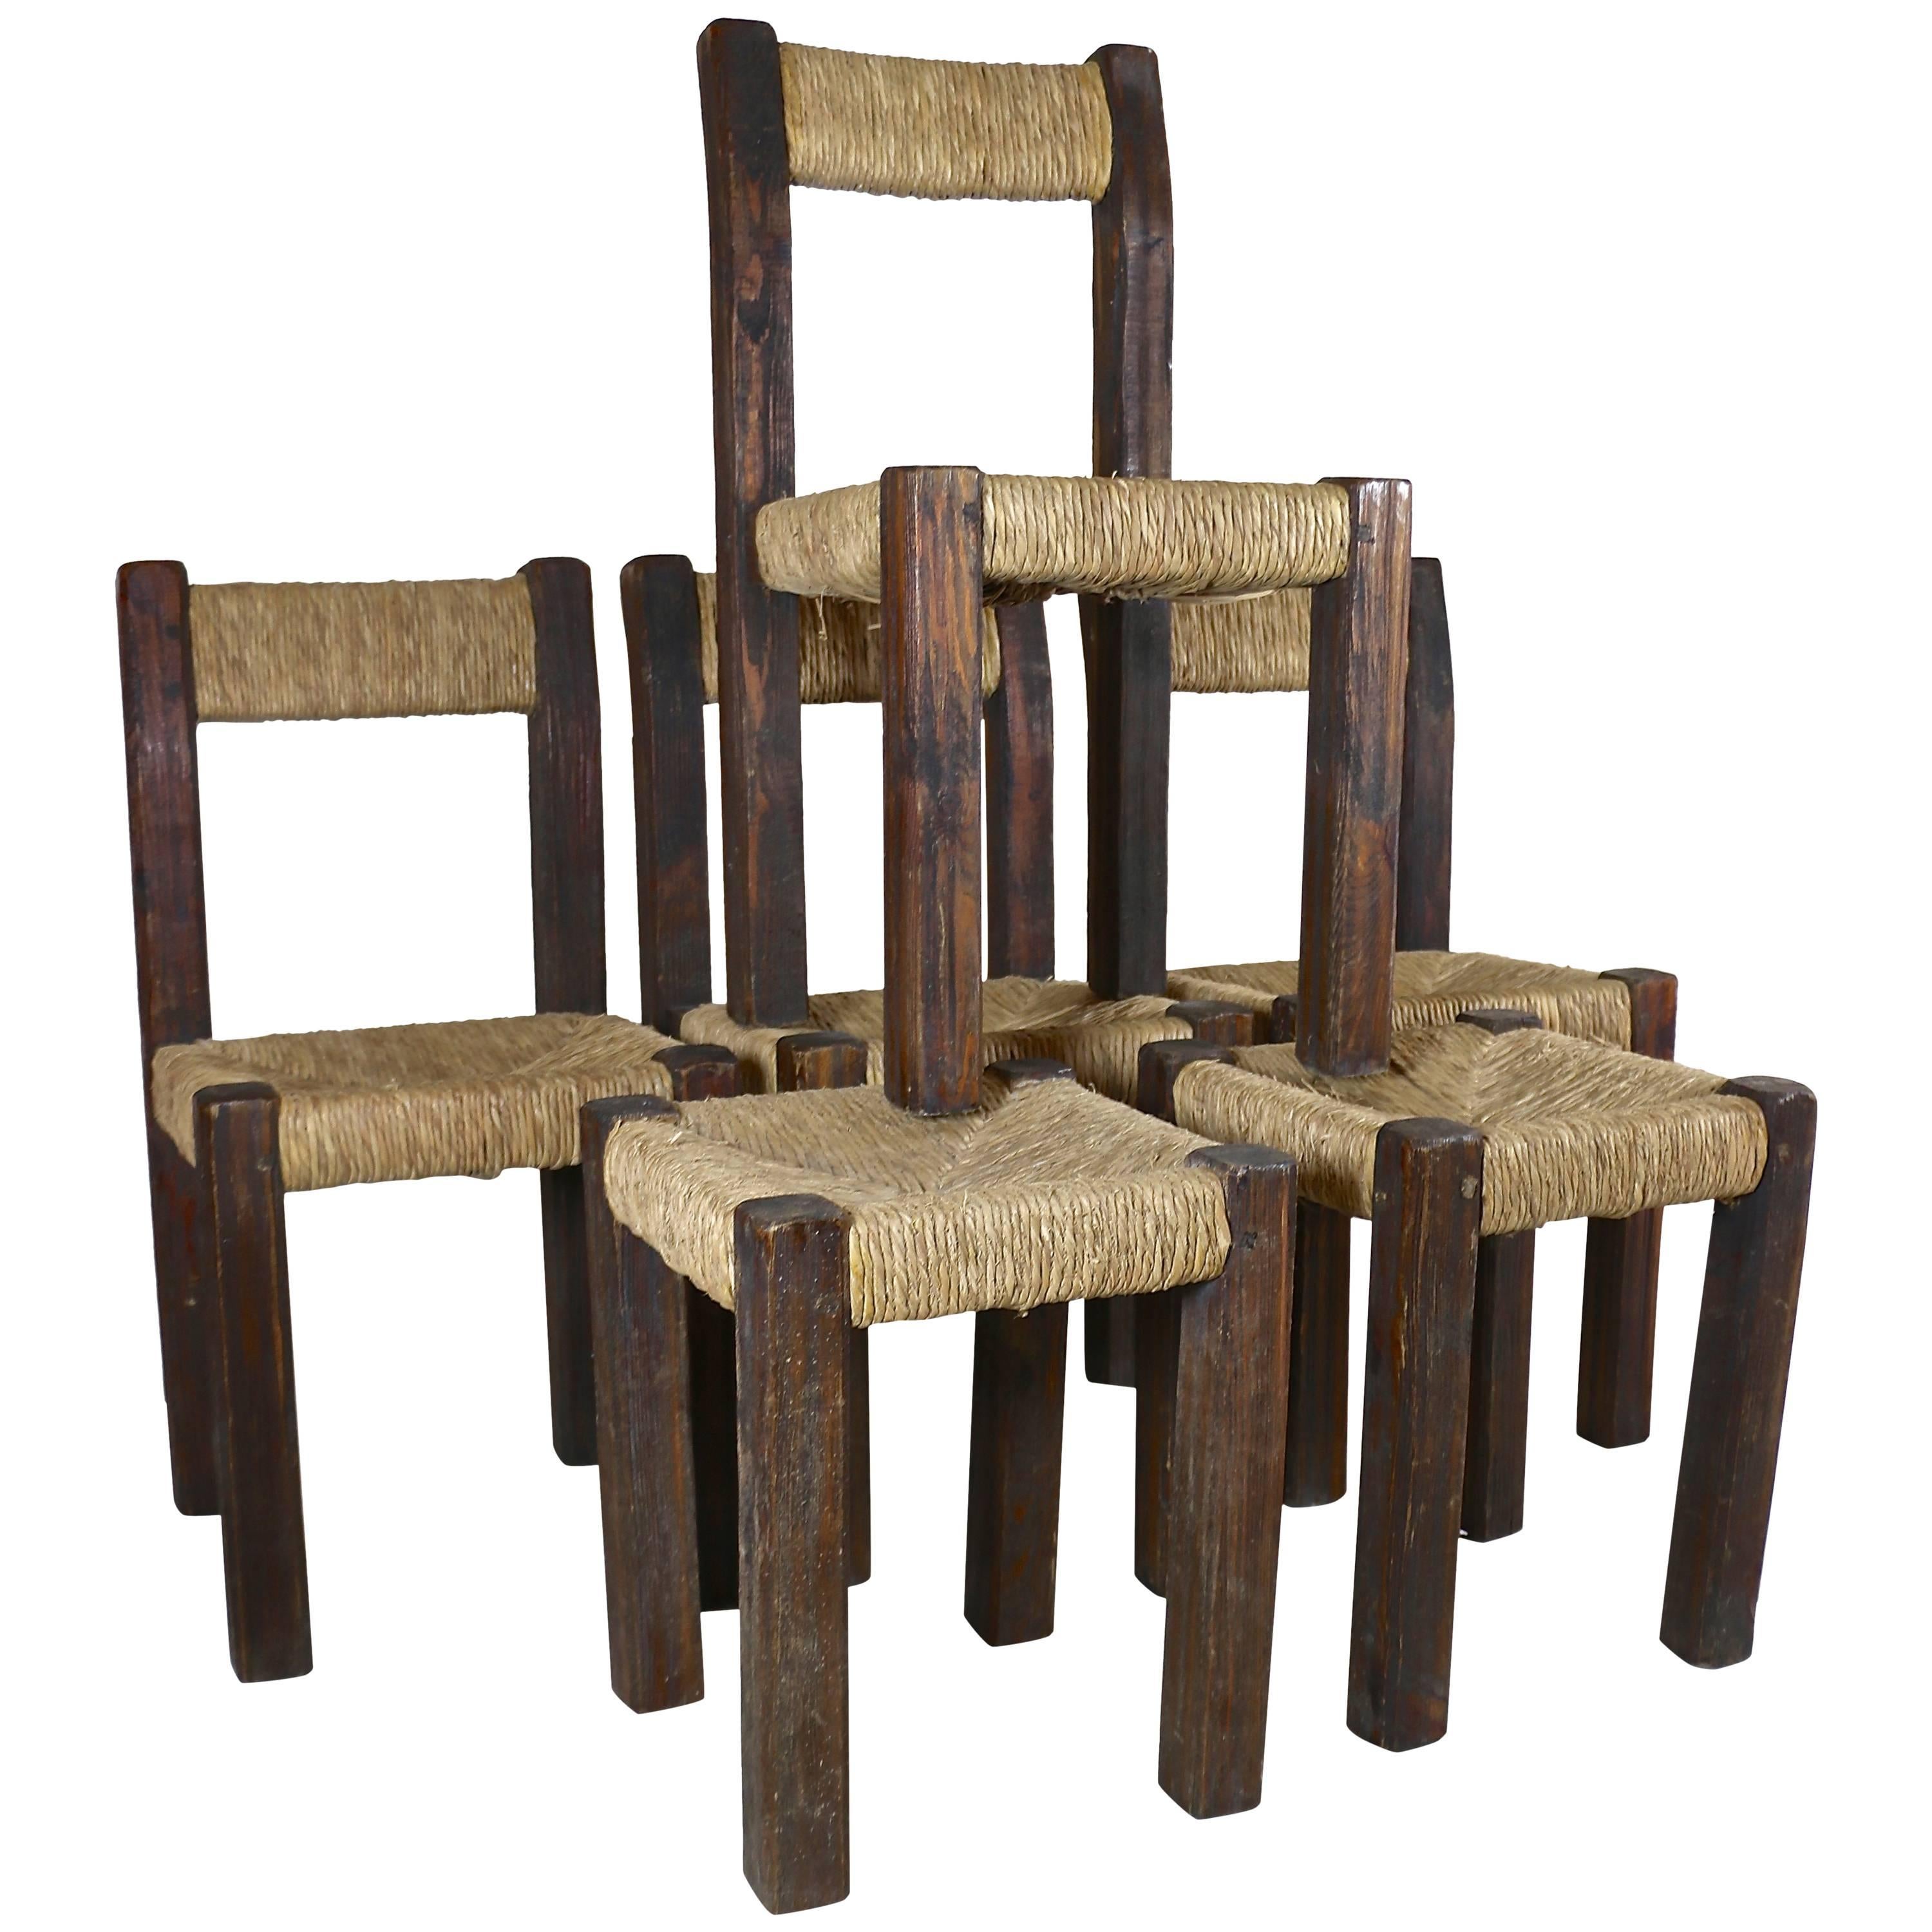 Four 1960s Rustic Chairs and Two Stools